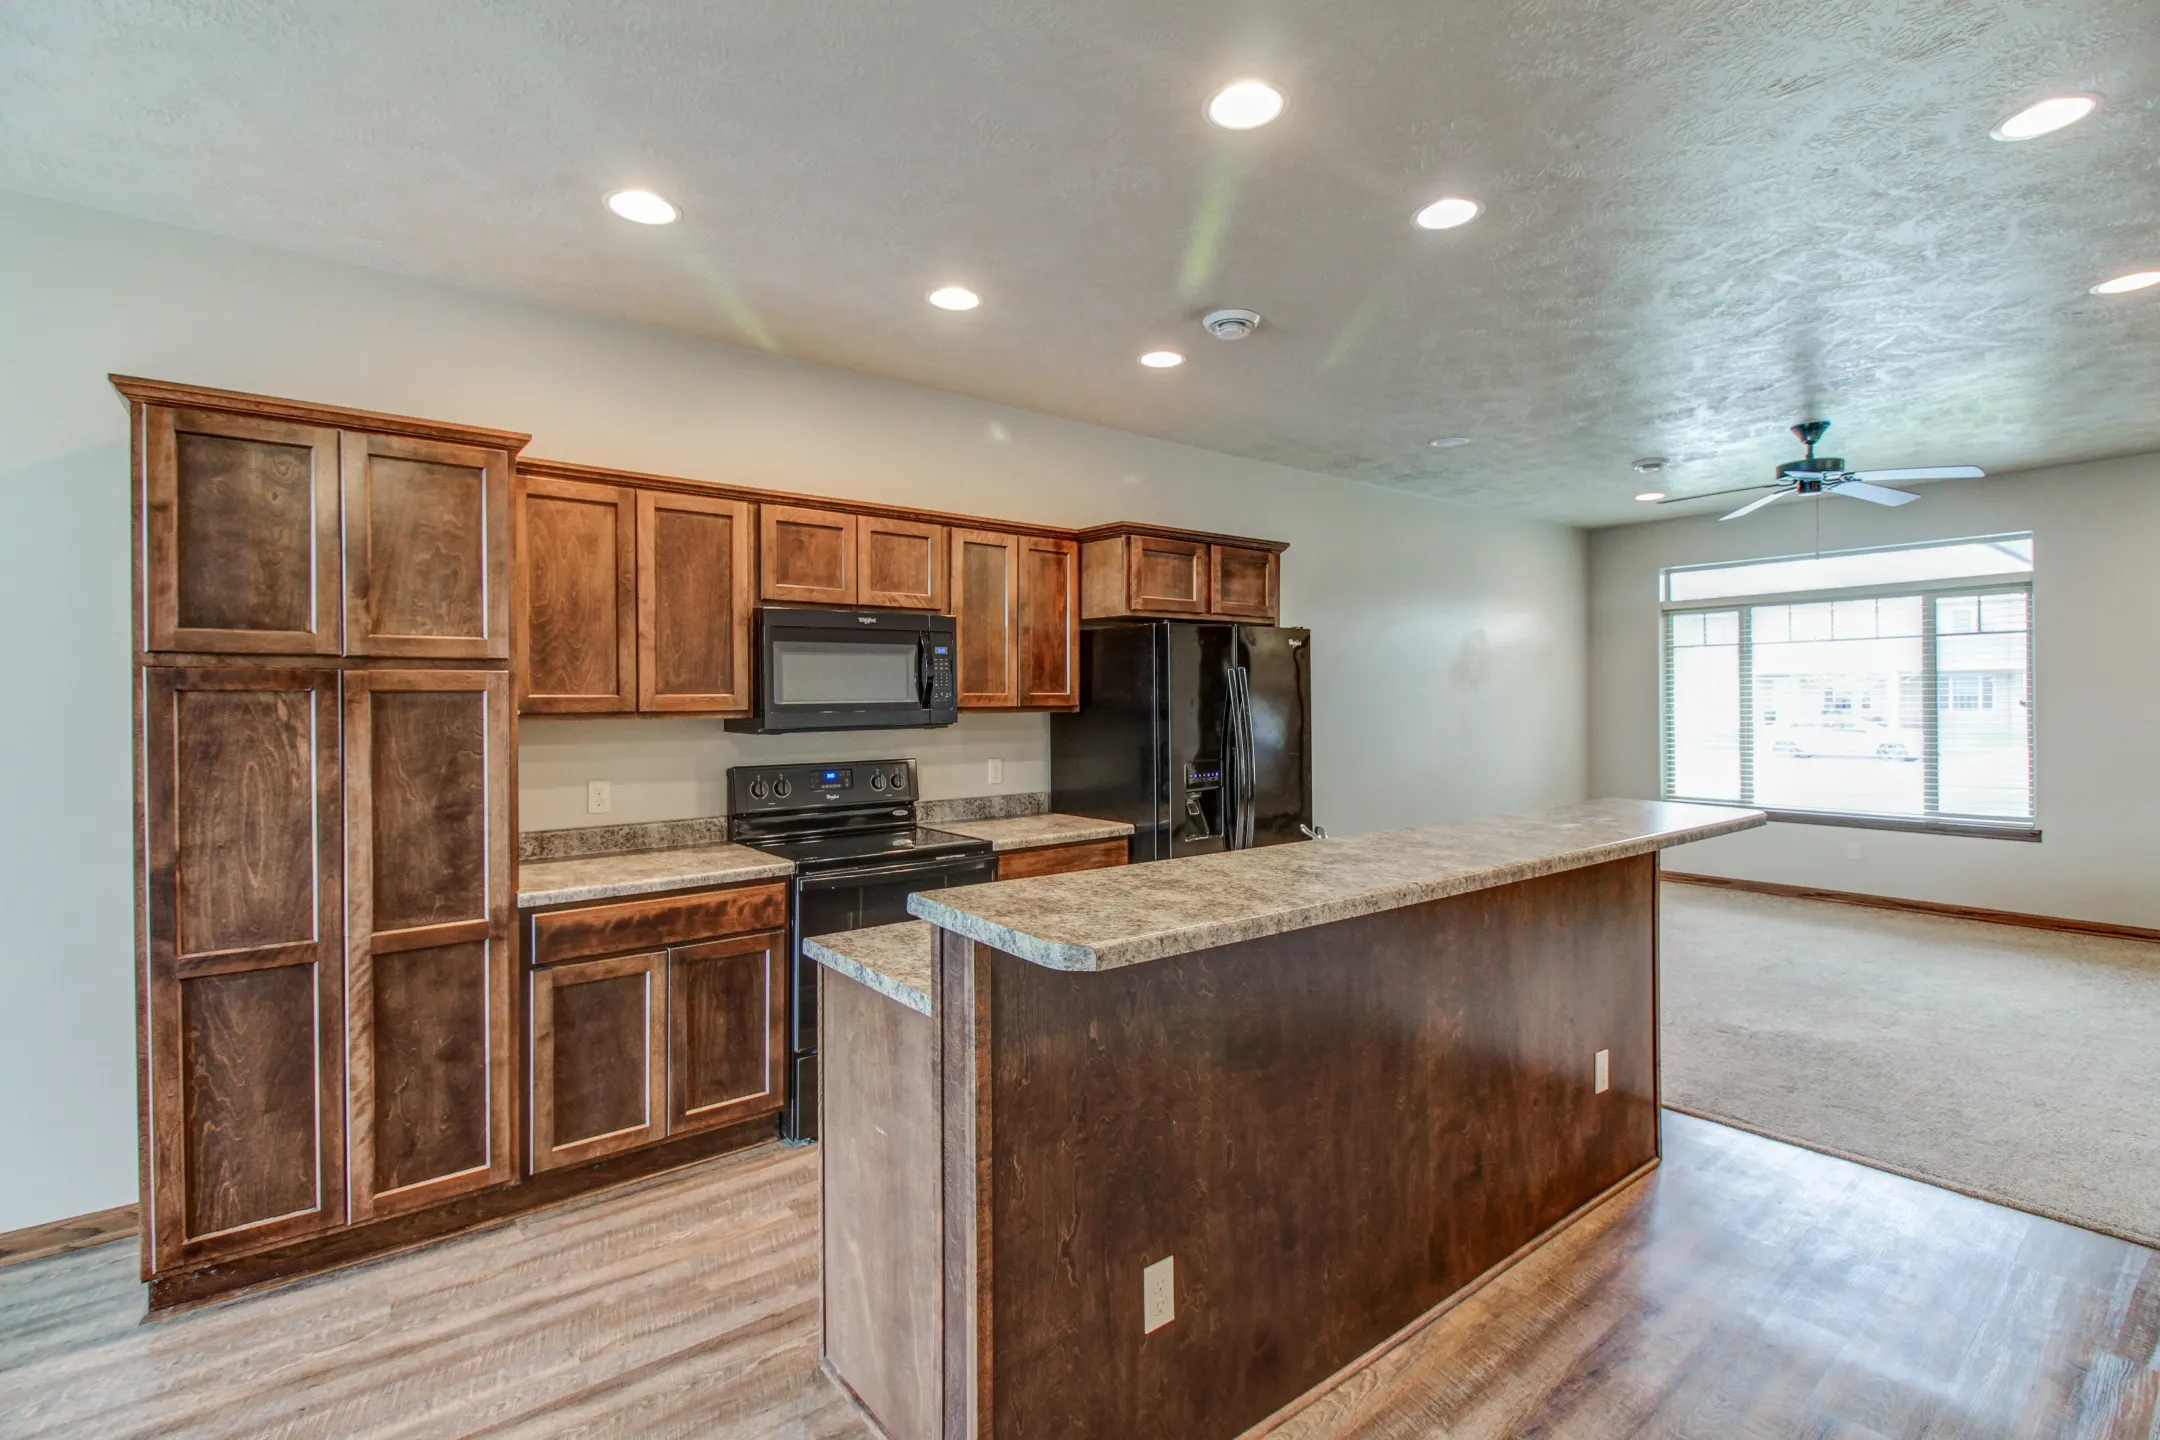 Kitchen - Bison Trail Twin Homes - Sioux Falls, SD